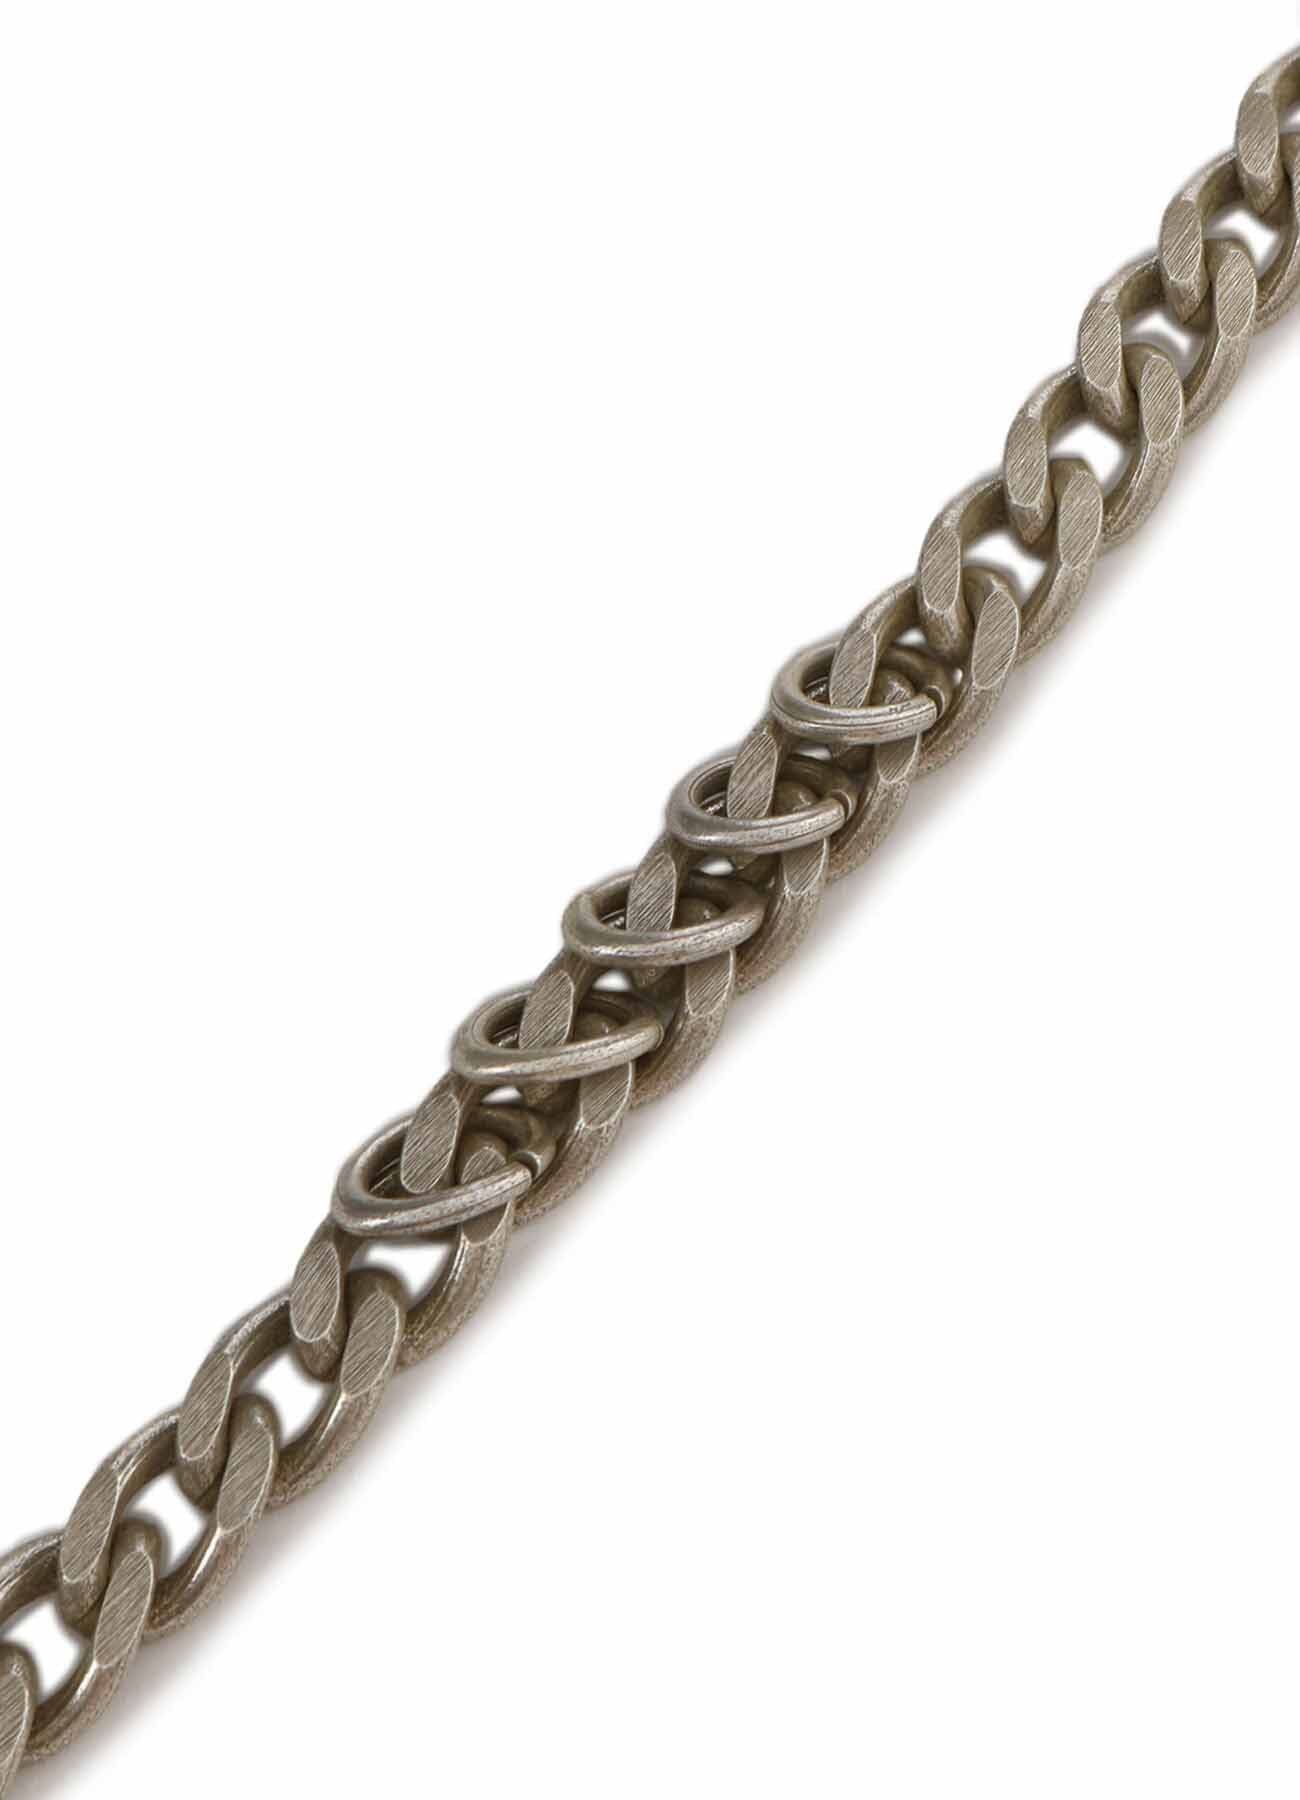 6-WAY CURVED CHAIN BRACELET NECKLACE(FREE SIZE Antique Silver): S 